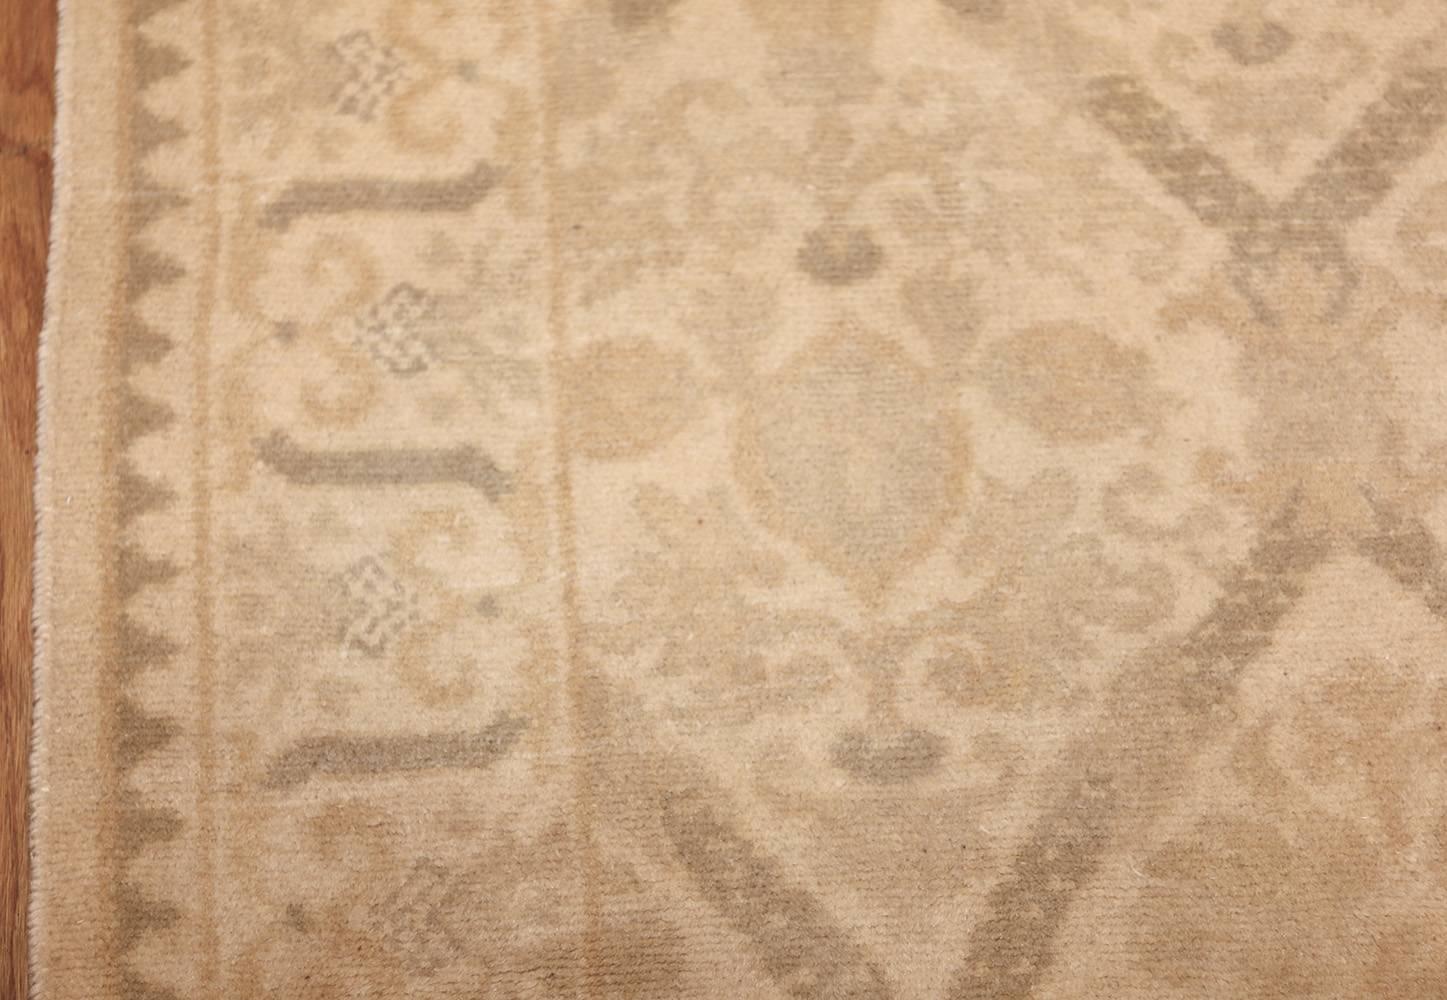 Ivory Background Colored Vintage Spanish Rug, Country of Origin: Spain, Circa Date: Middle of 20th Century. Size: 11 ft 8 in x 14 ft 1 in (3.56 m x 4.29 m)

This vintage Spanish rug delivers an antique tone, its pattern lightened and hazy like a